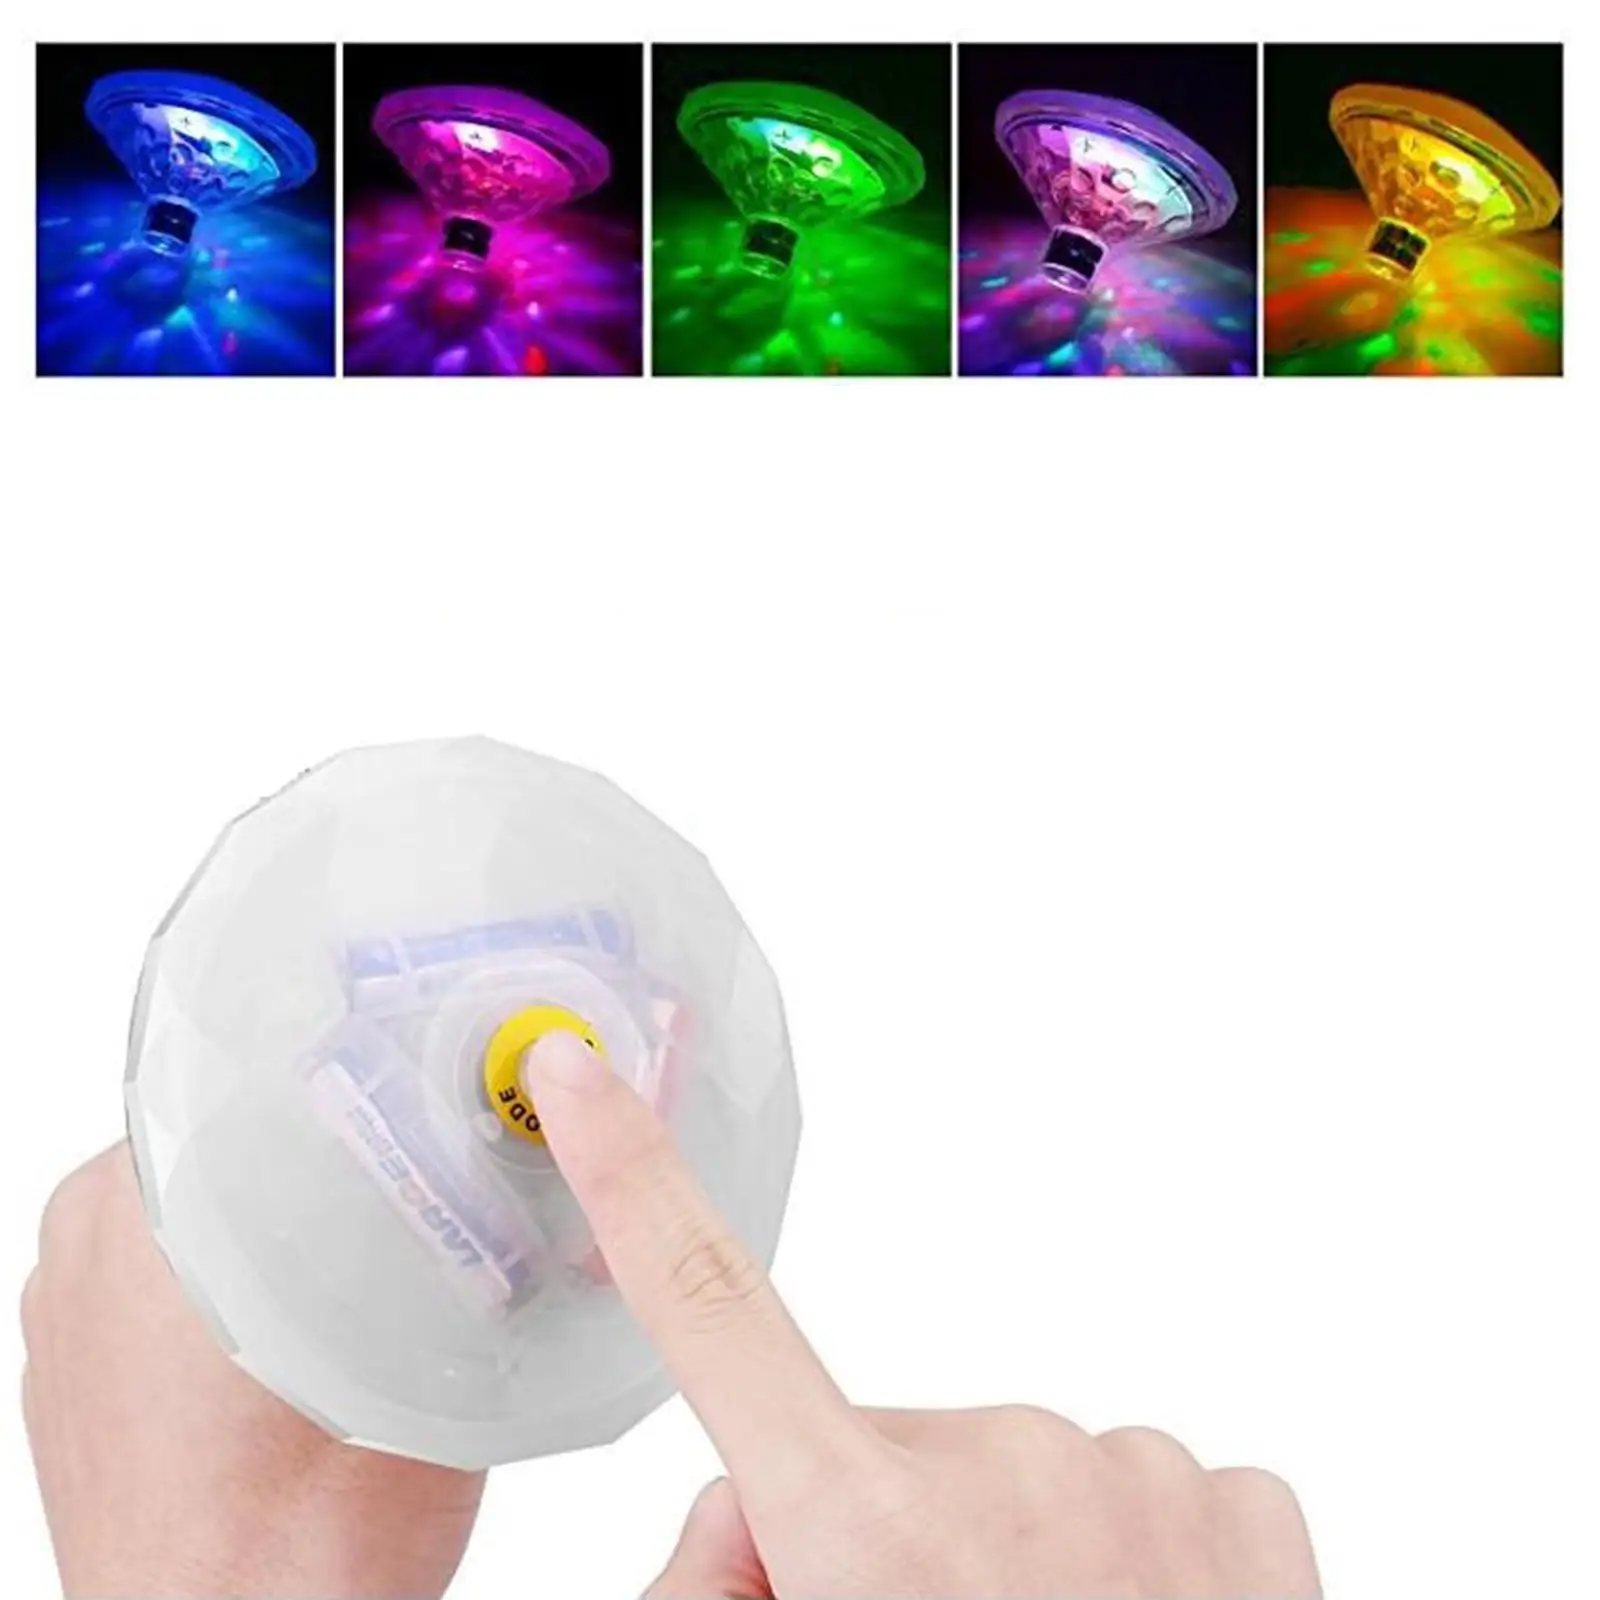 Floating LED Pool Light Pond Lamp Multicolor RGB Underwater Waterproof Submersible Lights for Hot Tub Garden Decor Home Outdoor